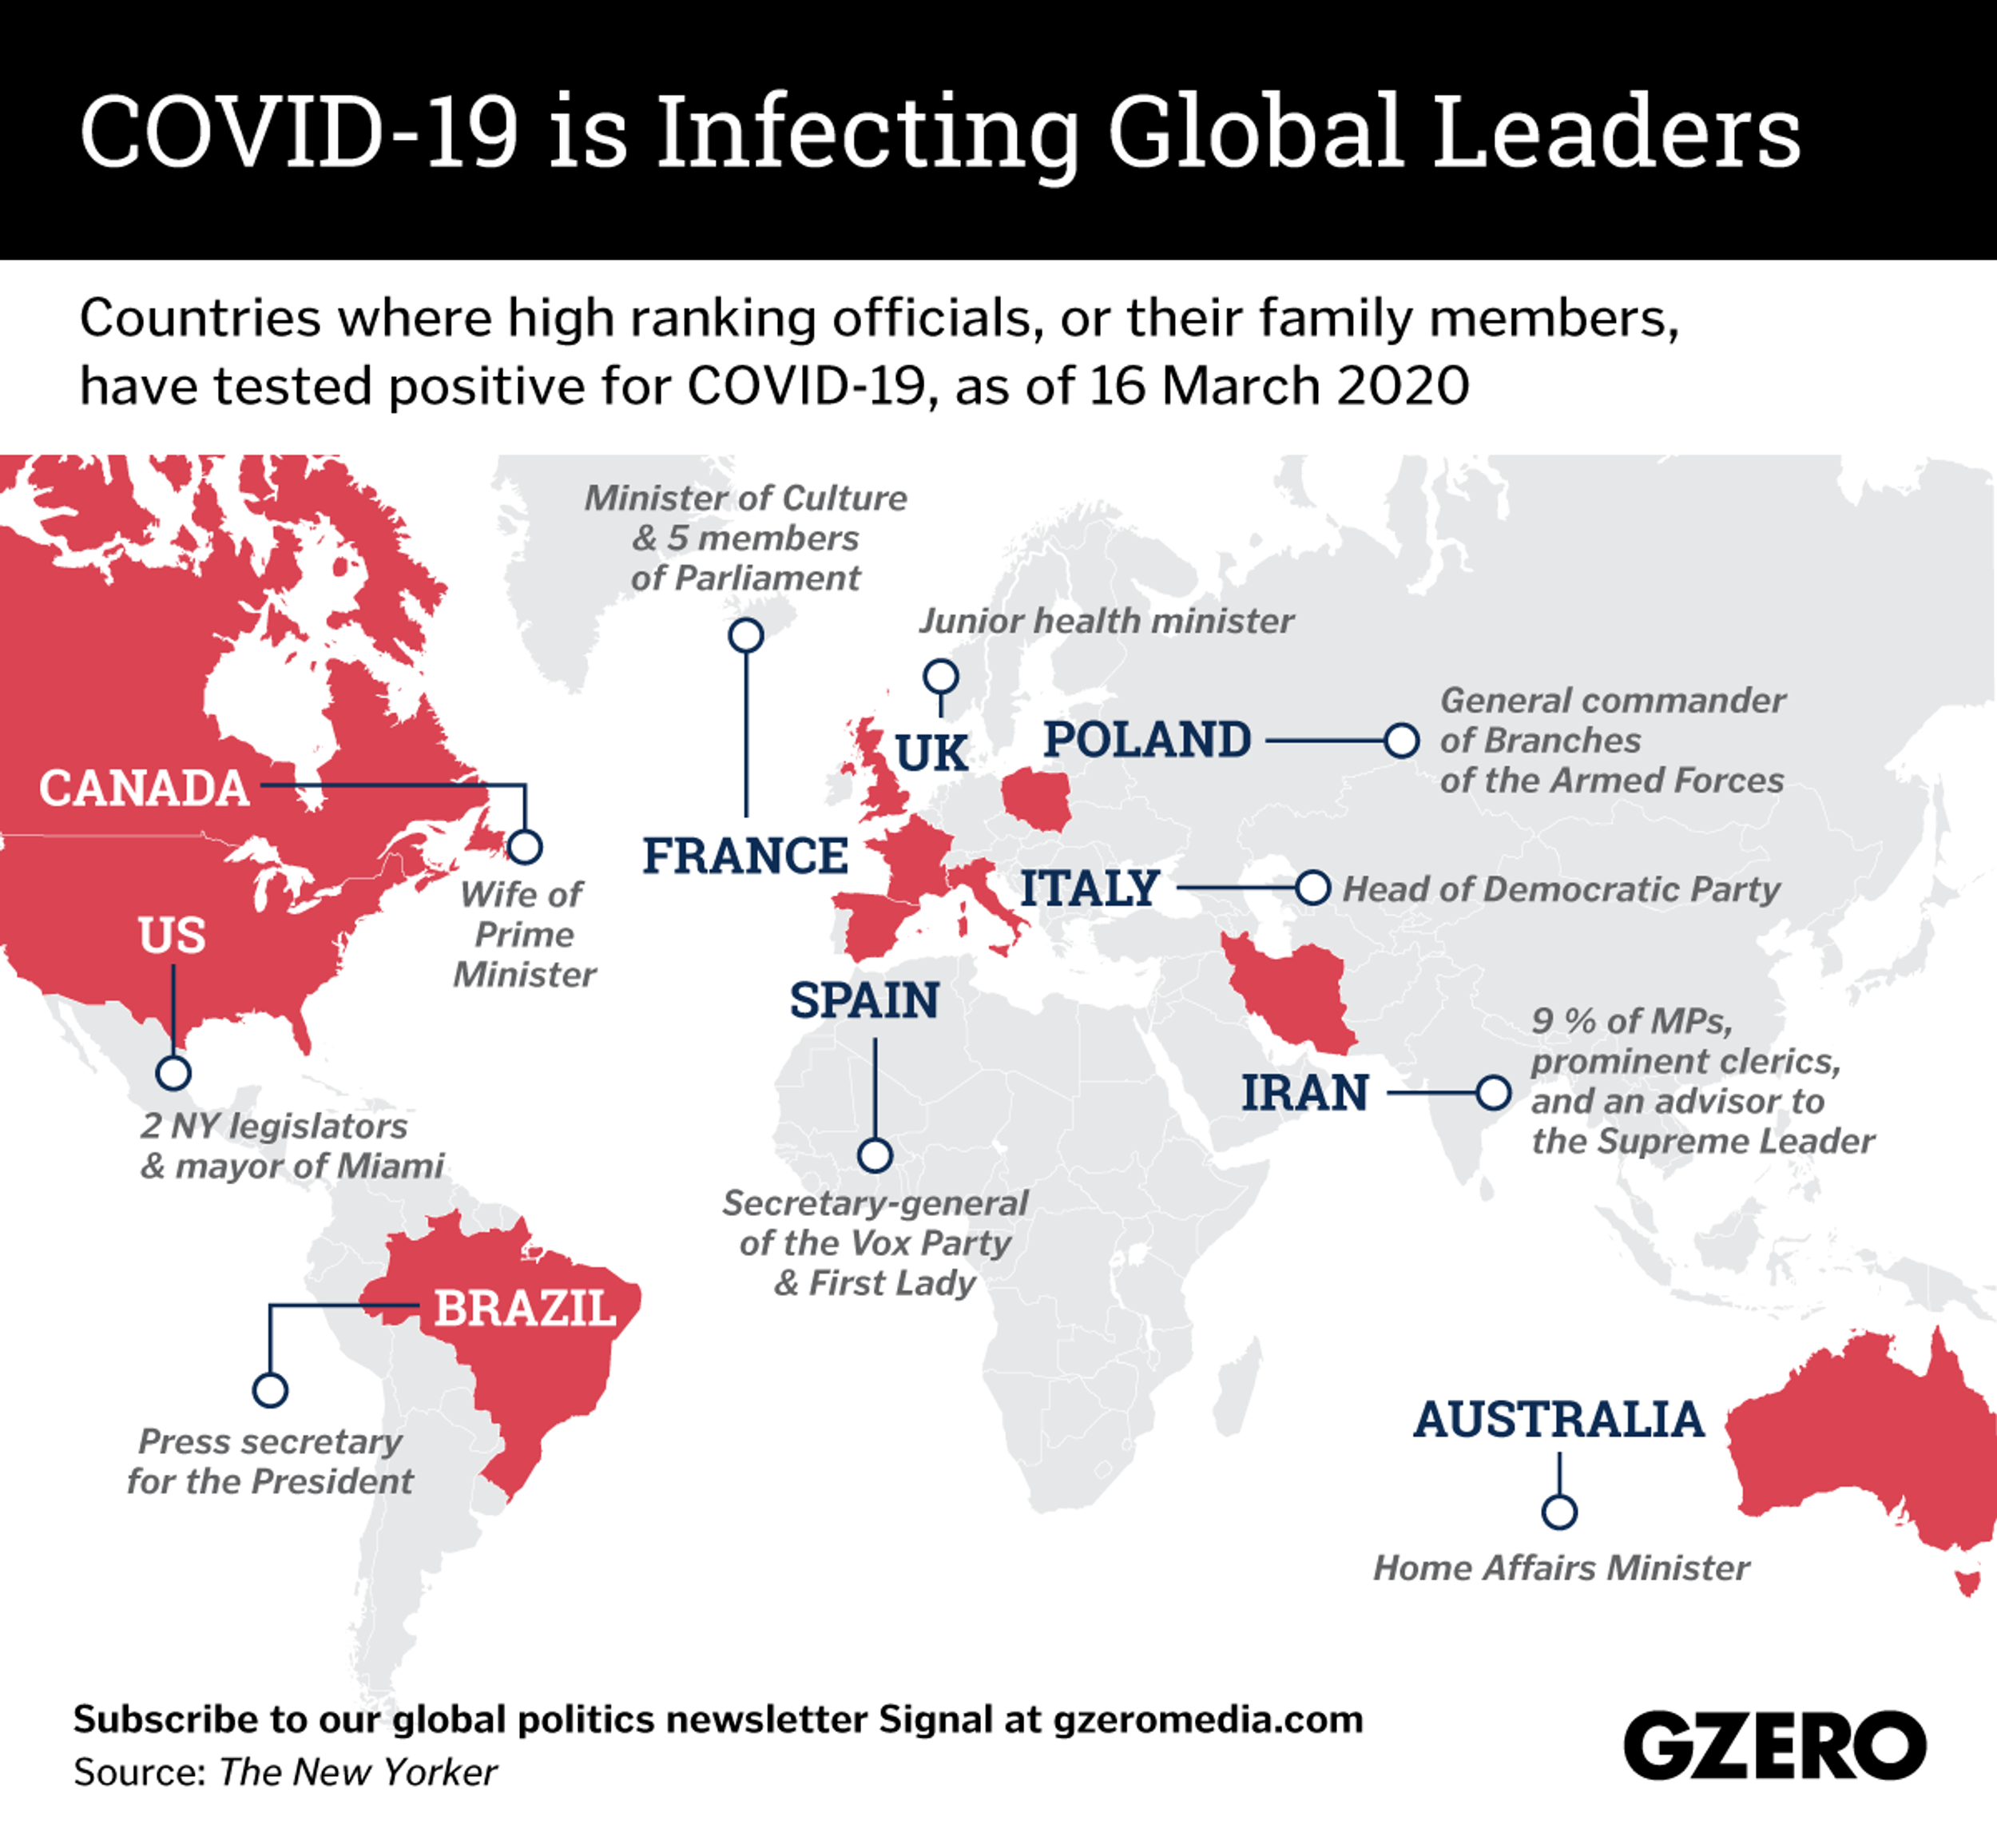 The Graphic Truth: COVID-19 is infecting global leaders